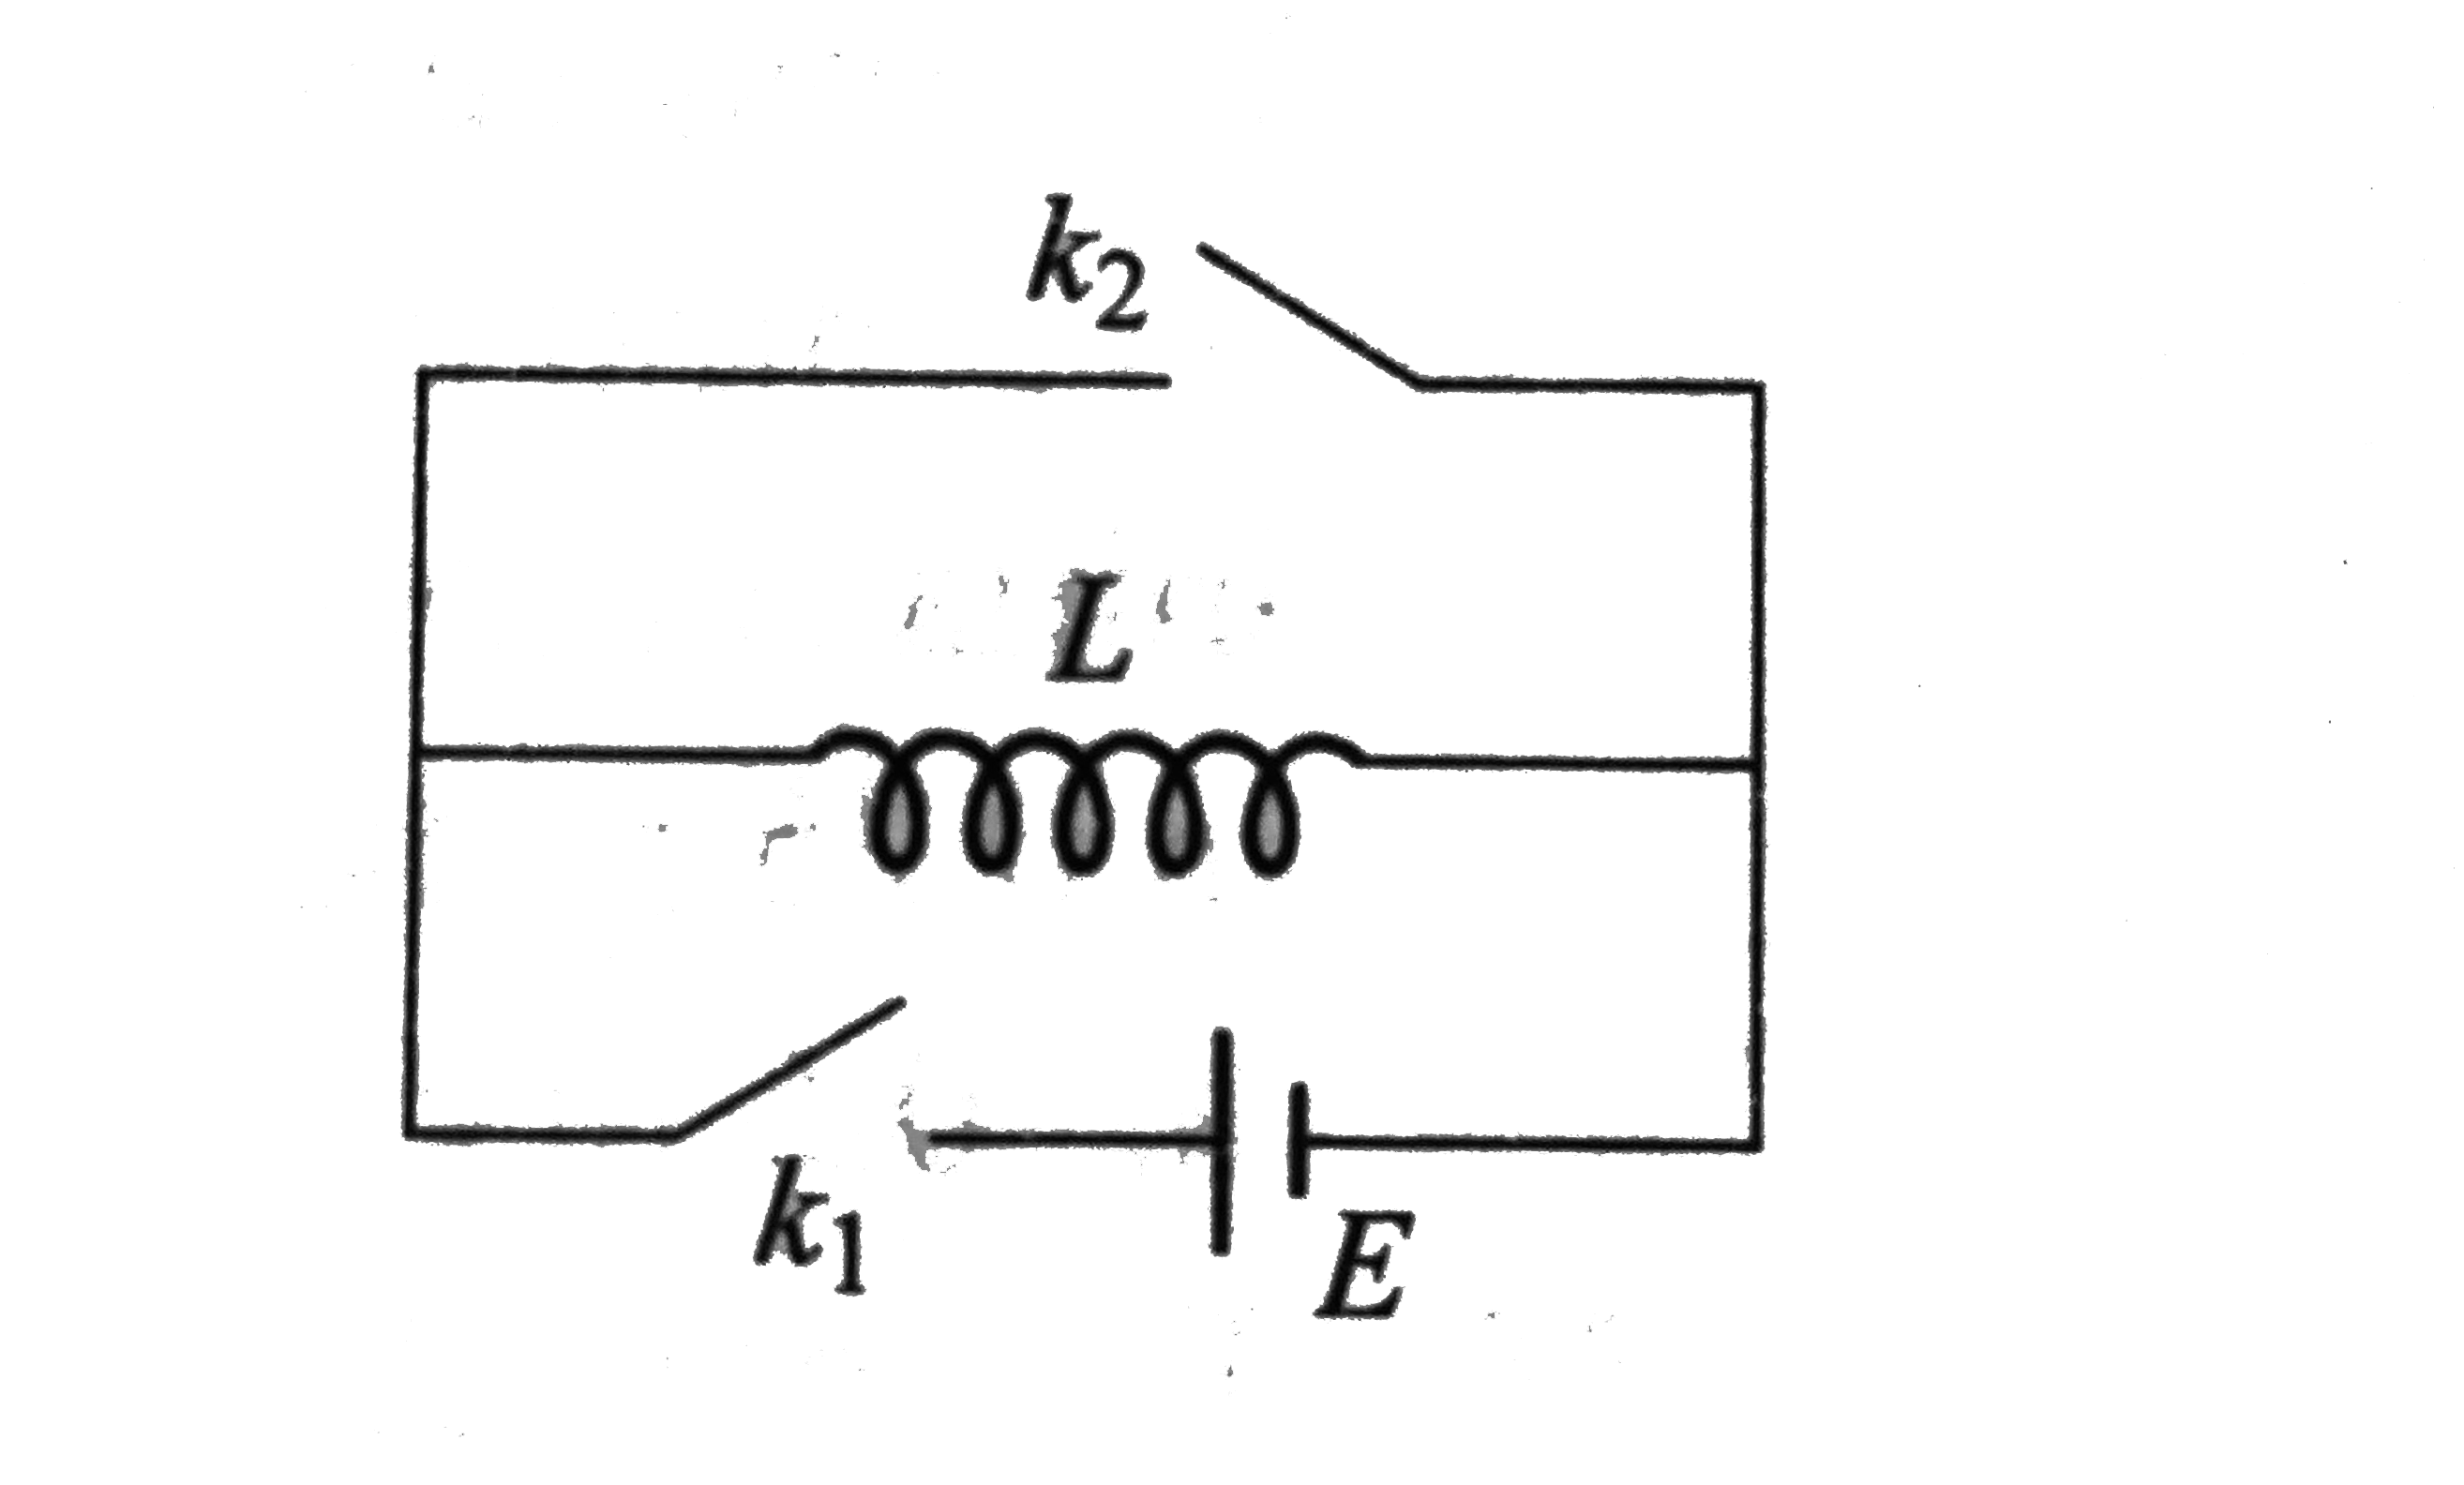 In the circuit shows in Fig. switch k(2) is open and switch k(1) is closed at t = 0. At time t = t(0), switch k(1) is opened and switch k(2) is simultaneosuly closed. The variation of inductor current with time is